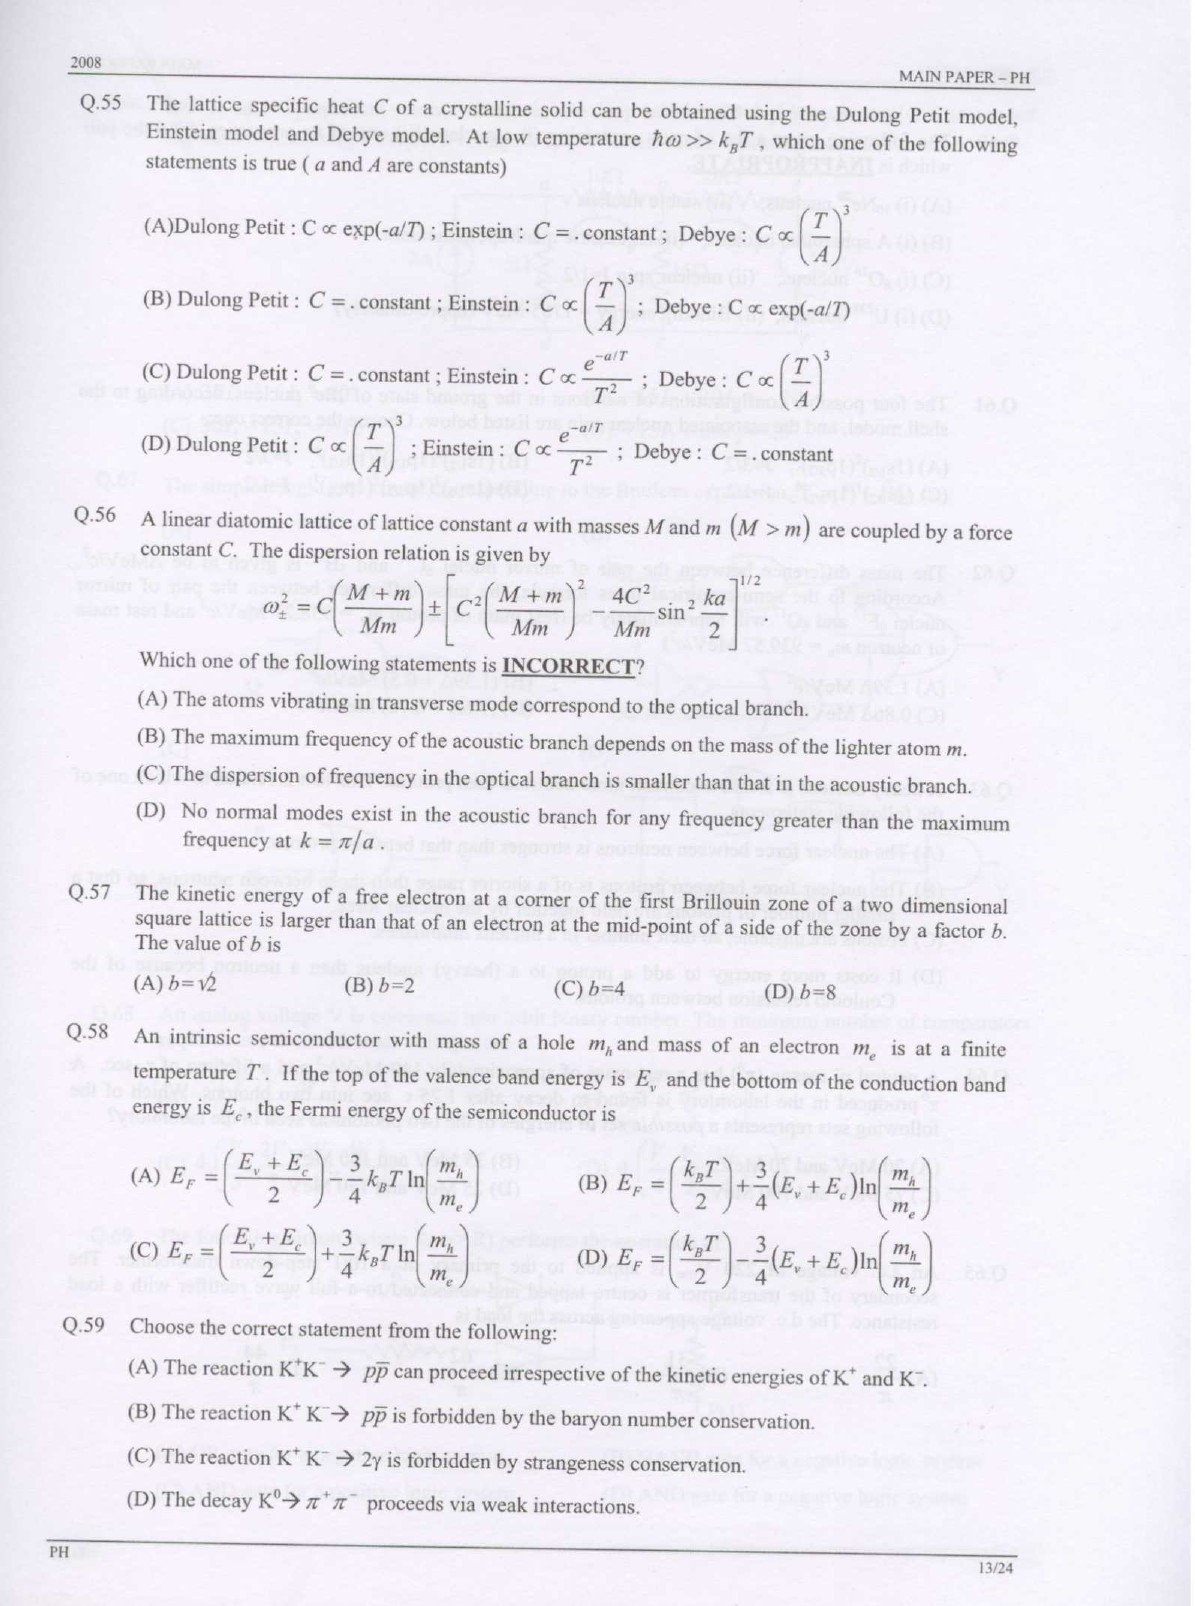 GATE Exam Question Paper 2008 Physics 13